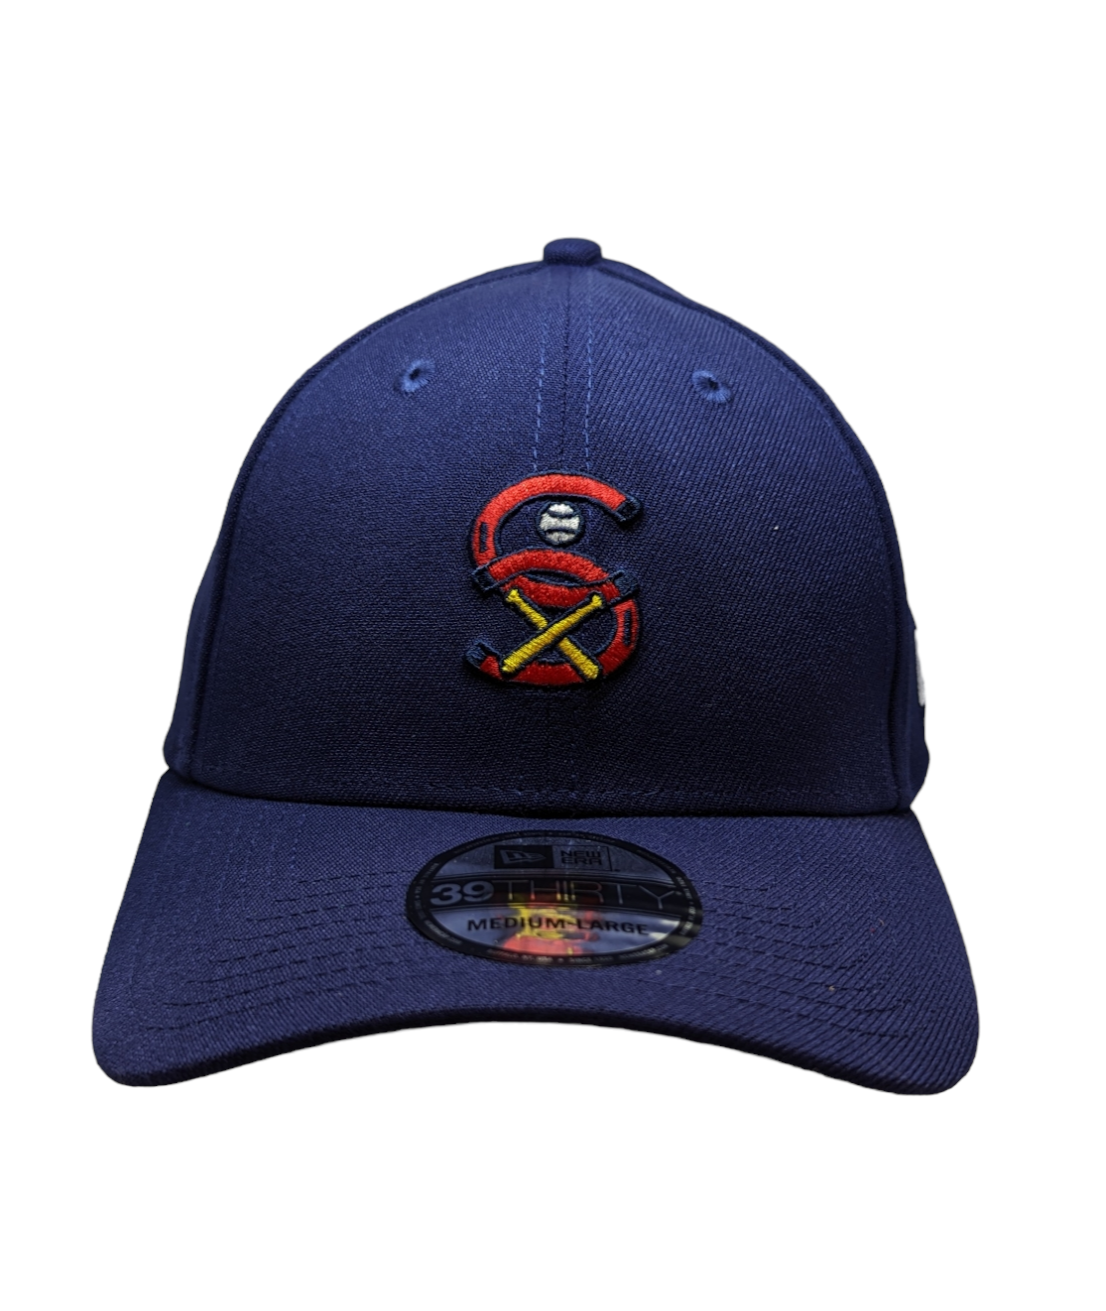 Chicago White Sox Classic 1932 Alternate Cooperstown Collection Navy 39THIRTY Flex Fit New Era Hat